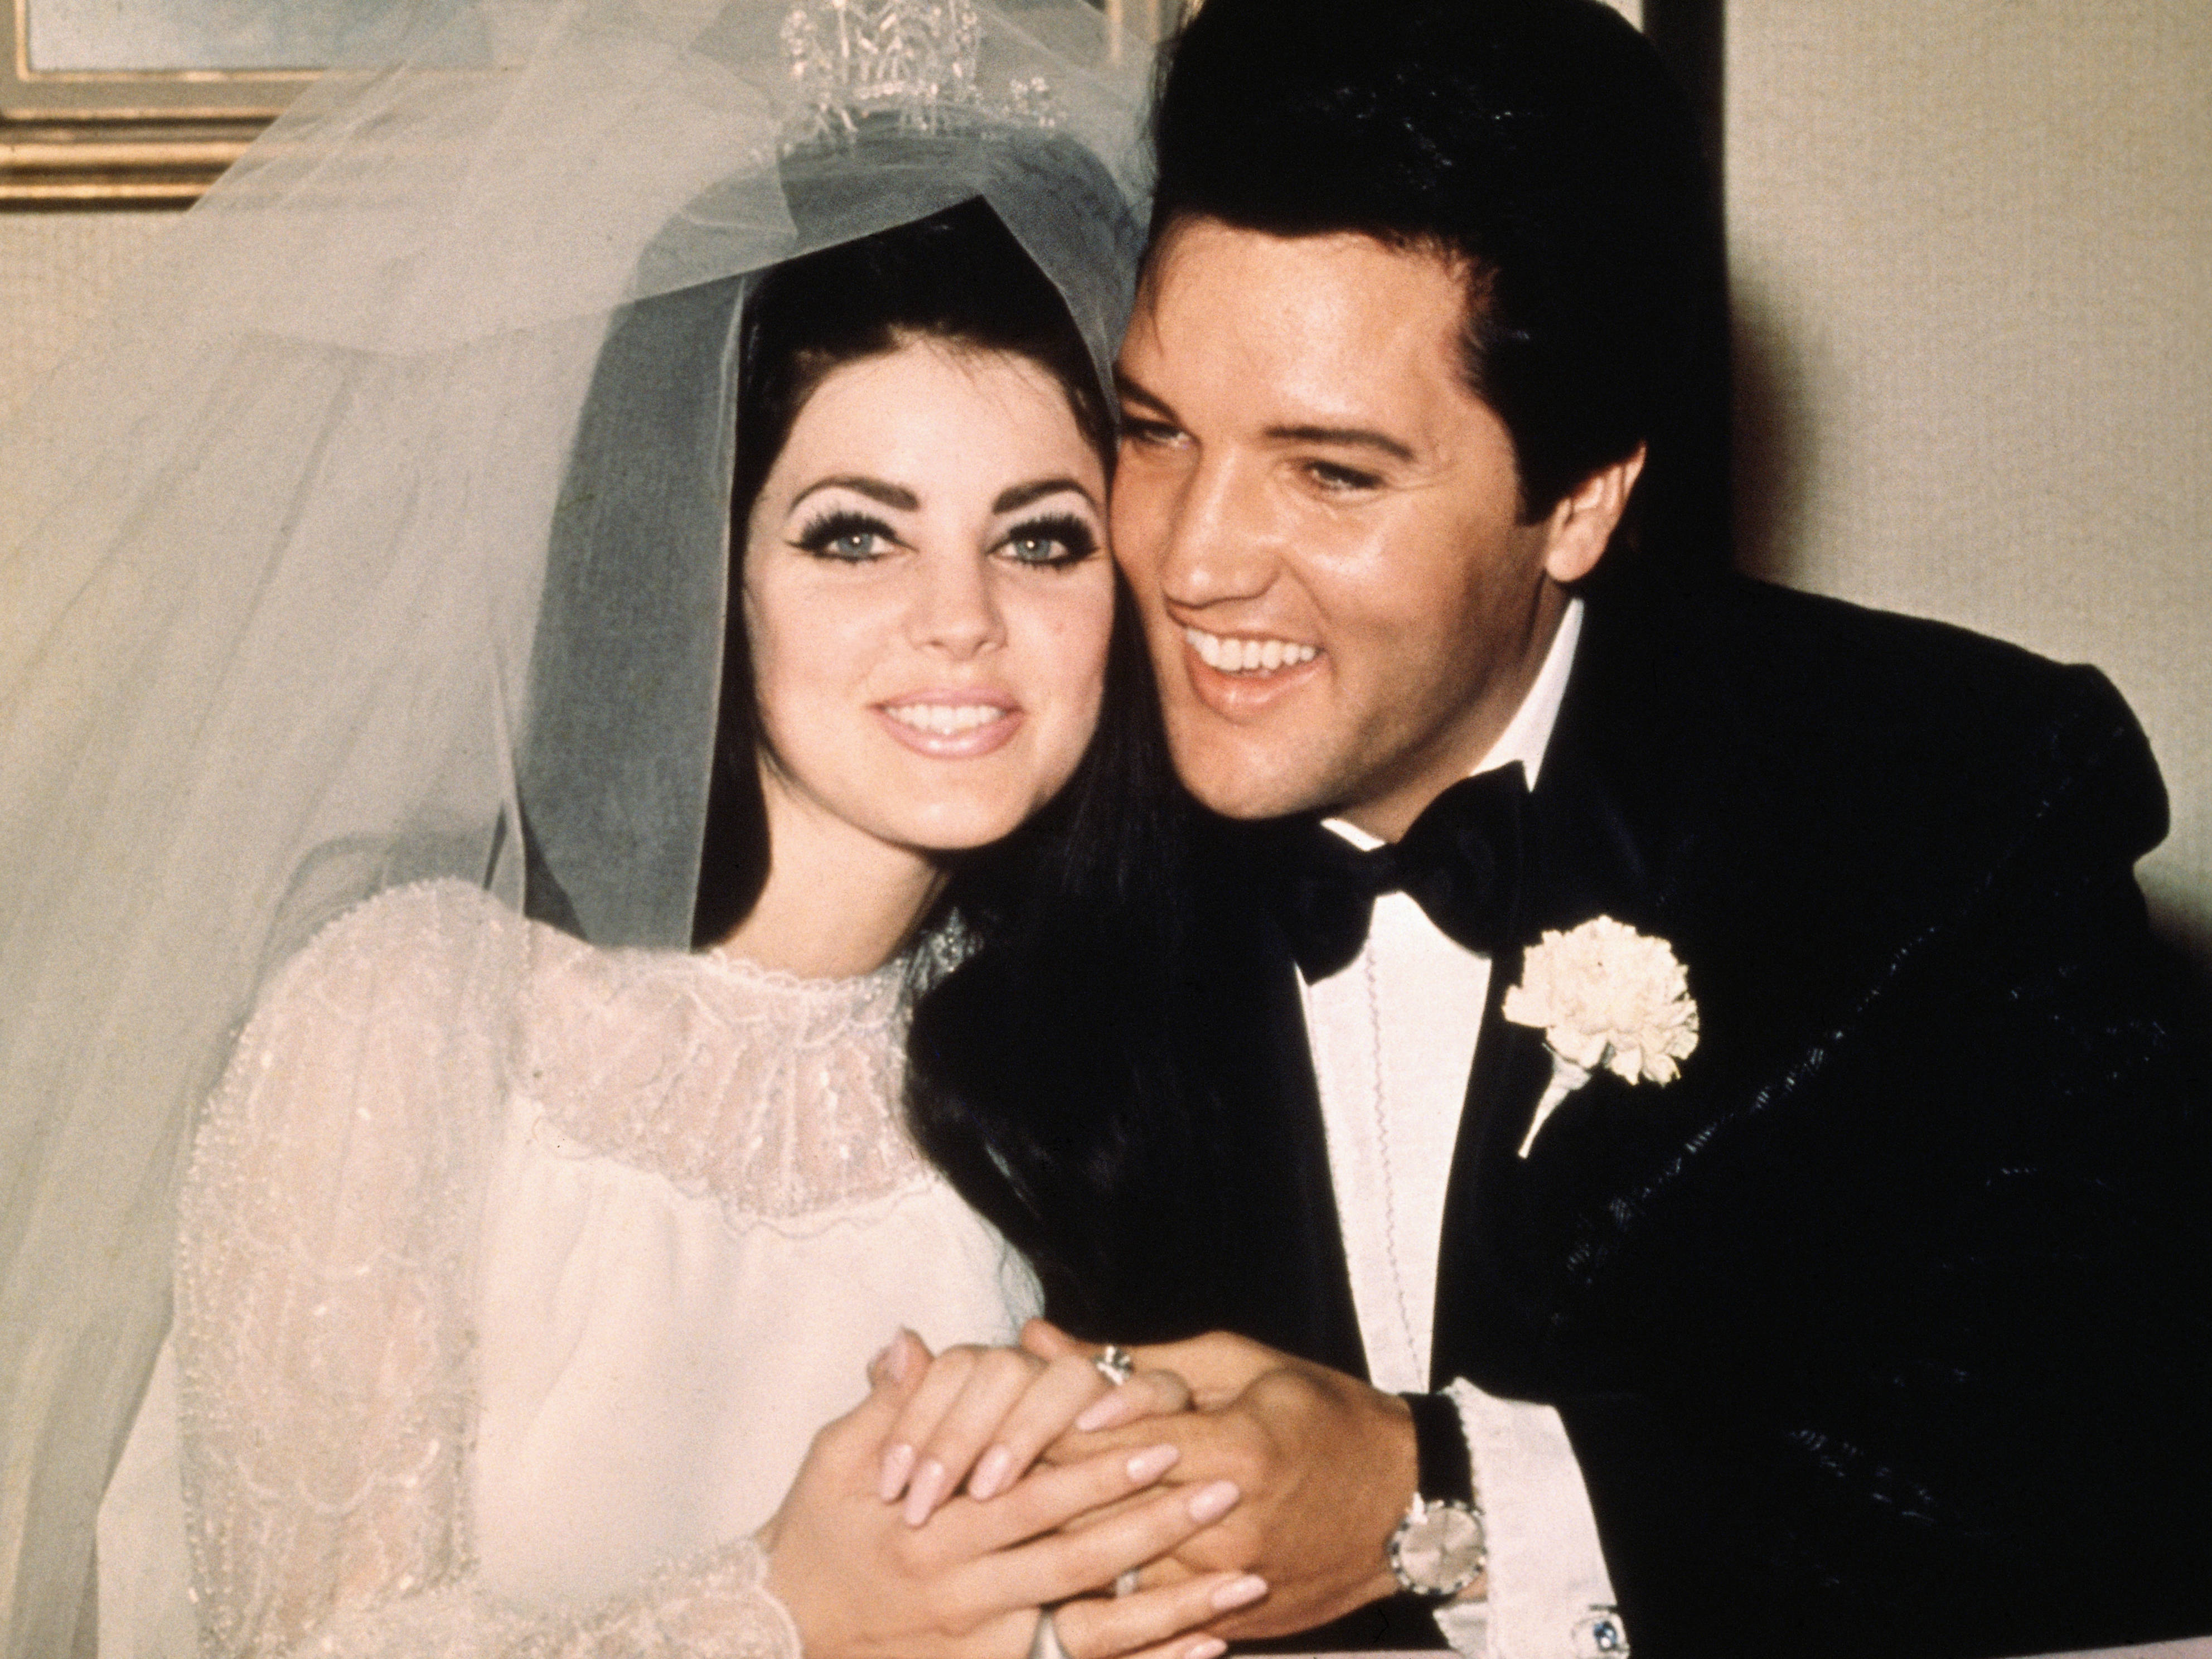 Does anyone know if Elvis and Priscilla had any kids?